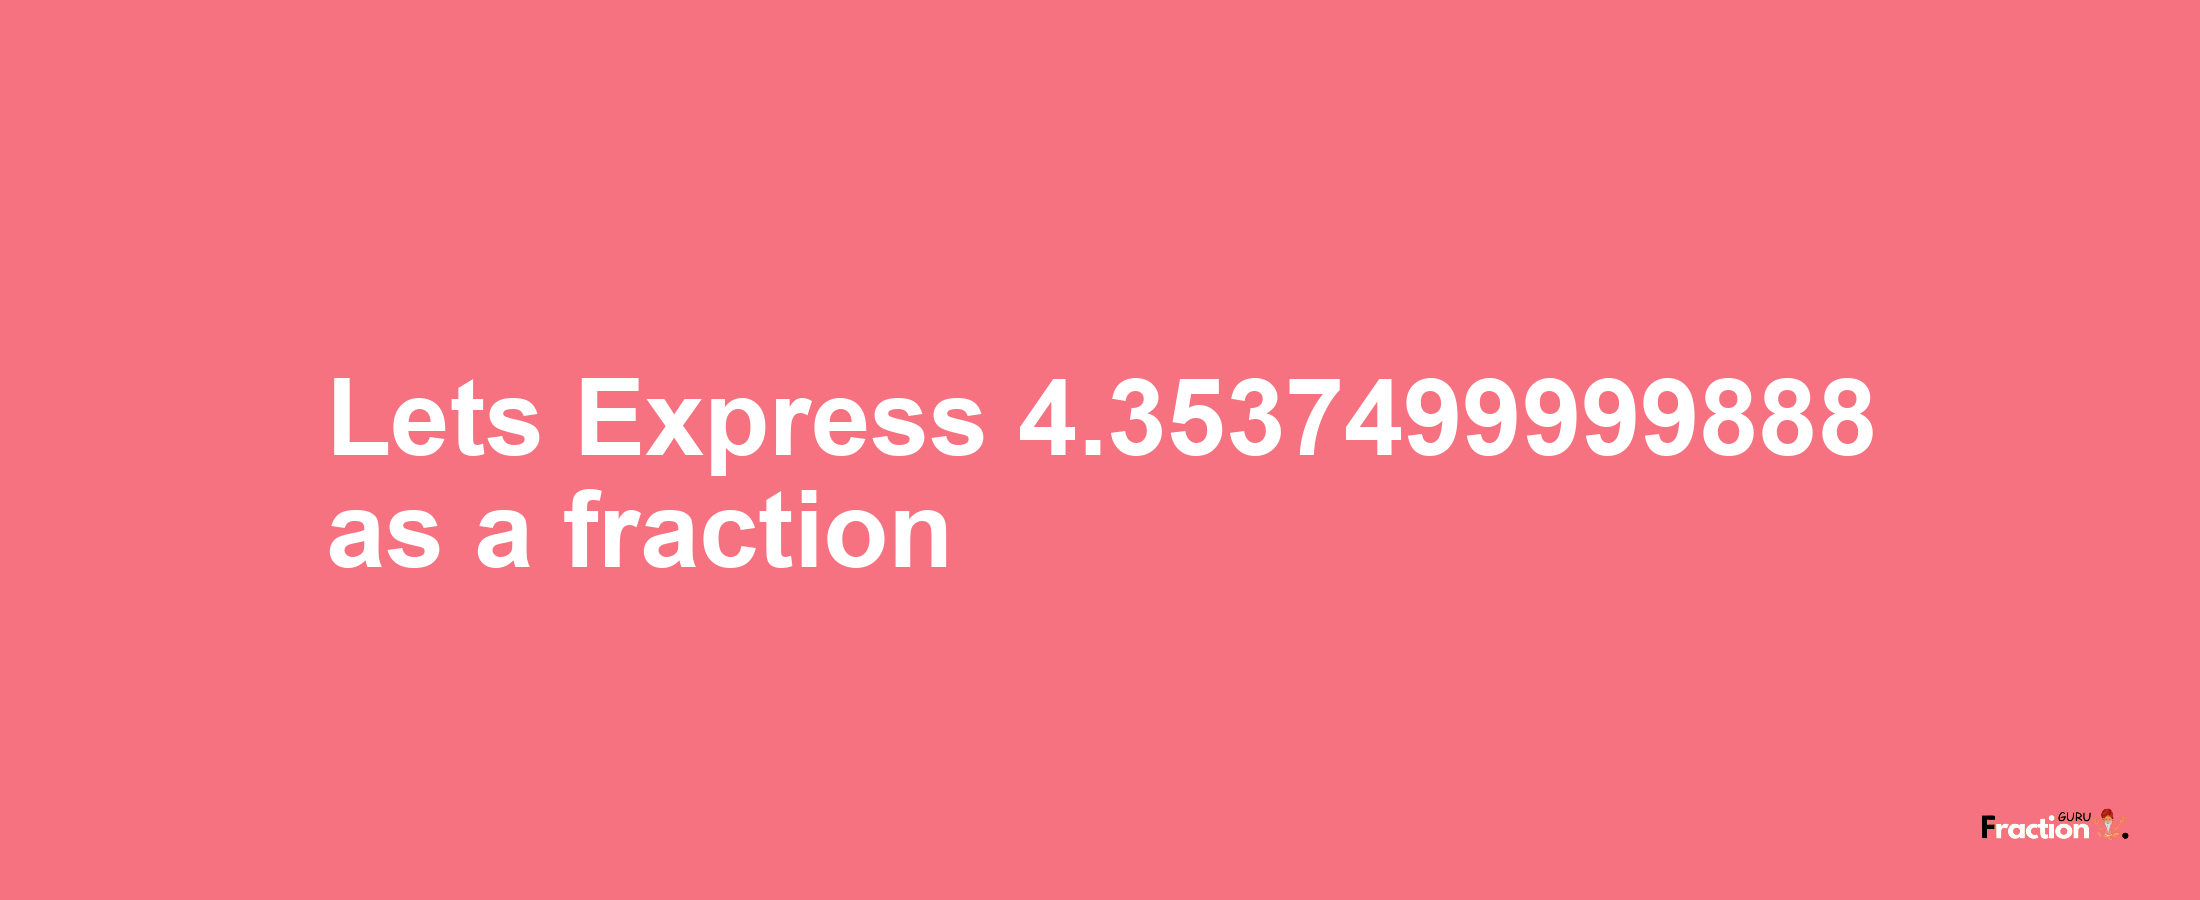 Lets Express 4.3537499999888 as afraction